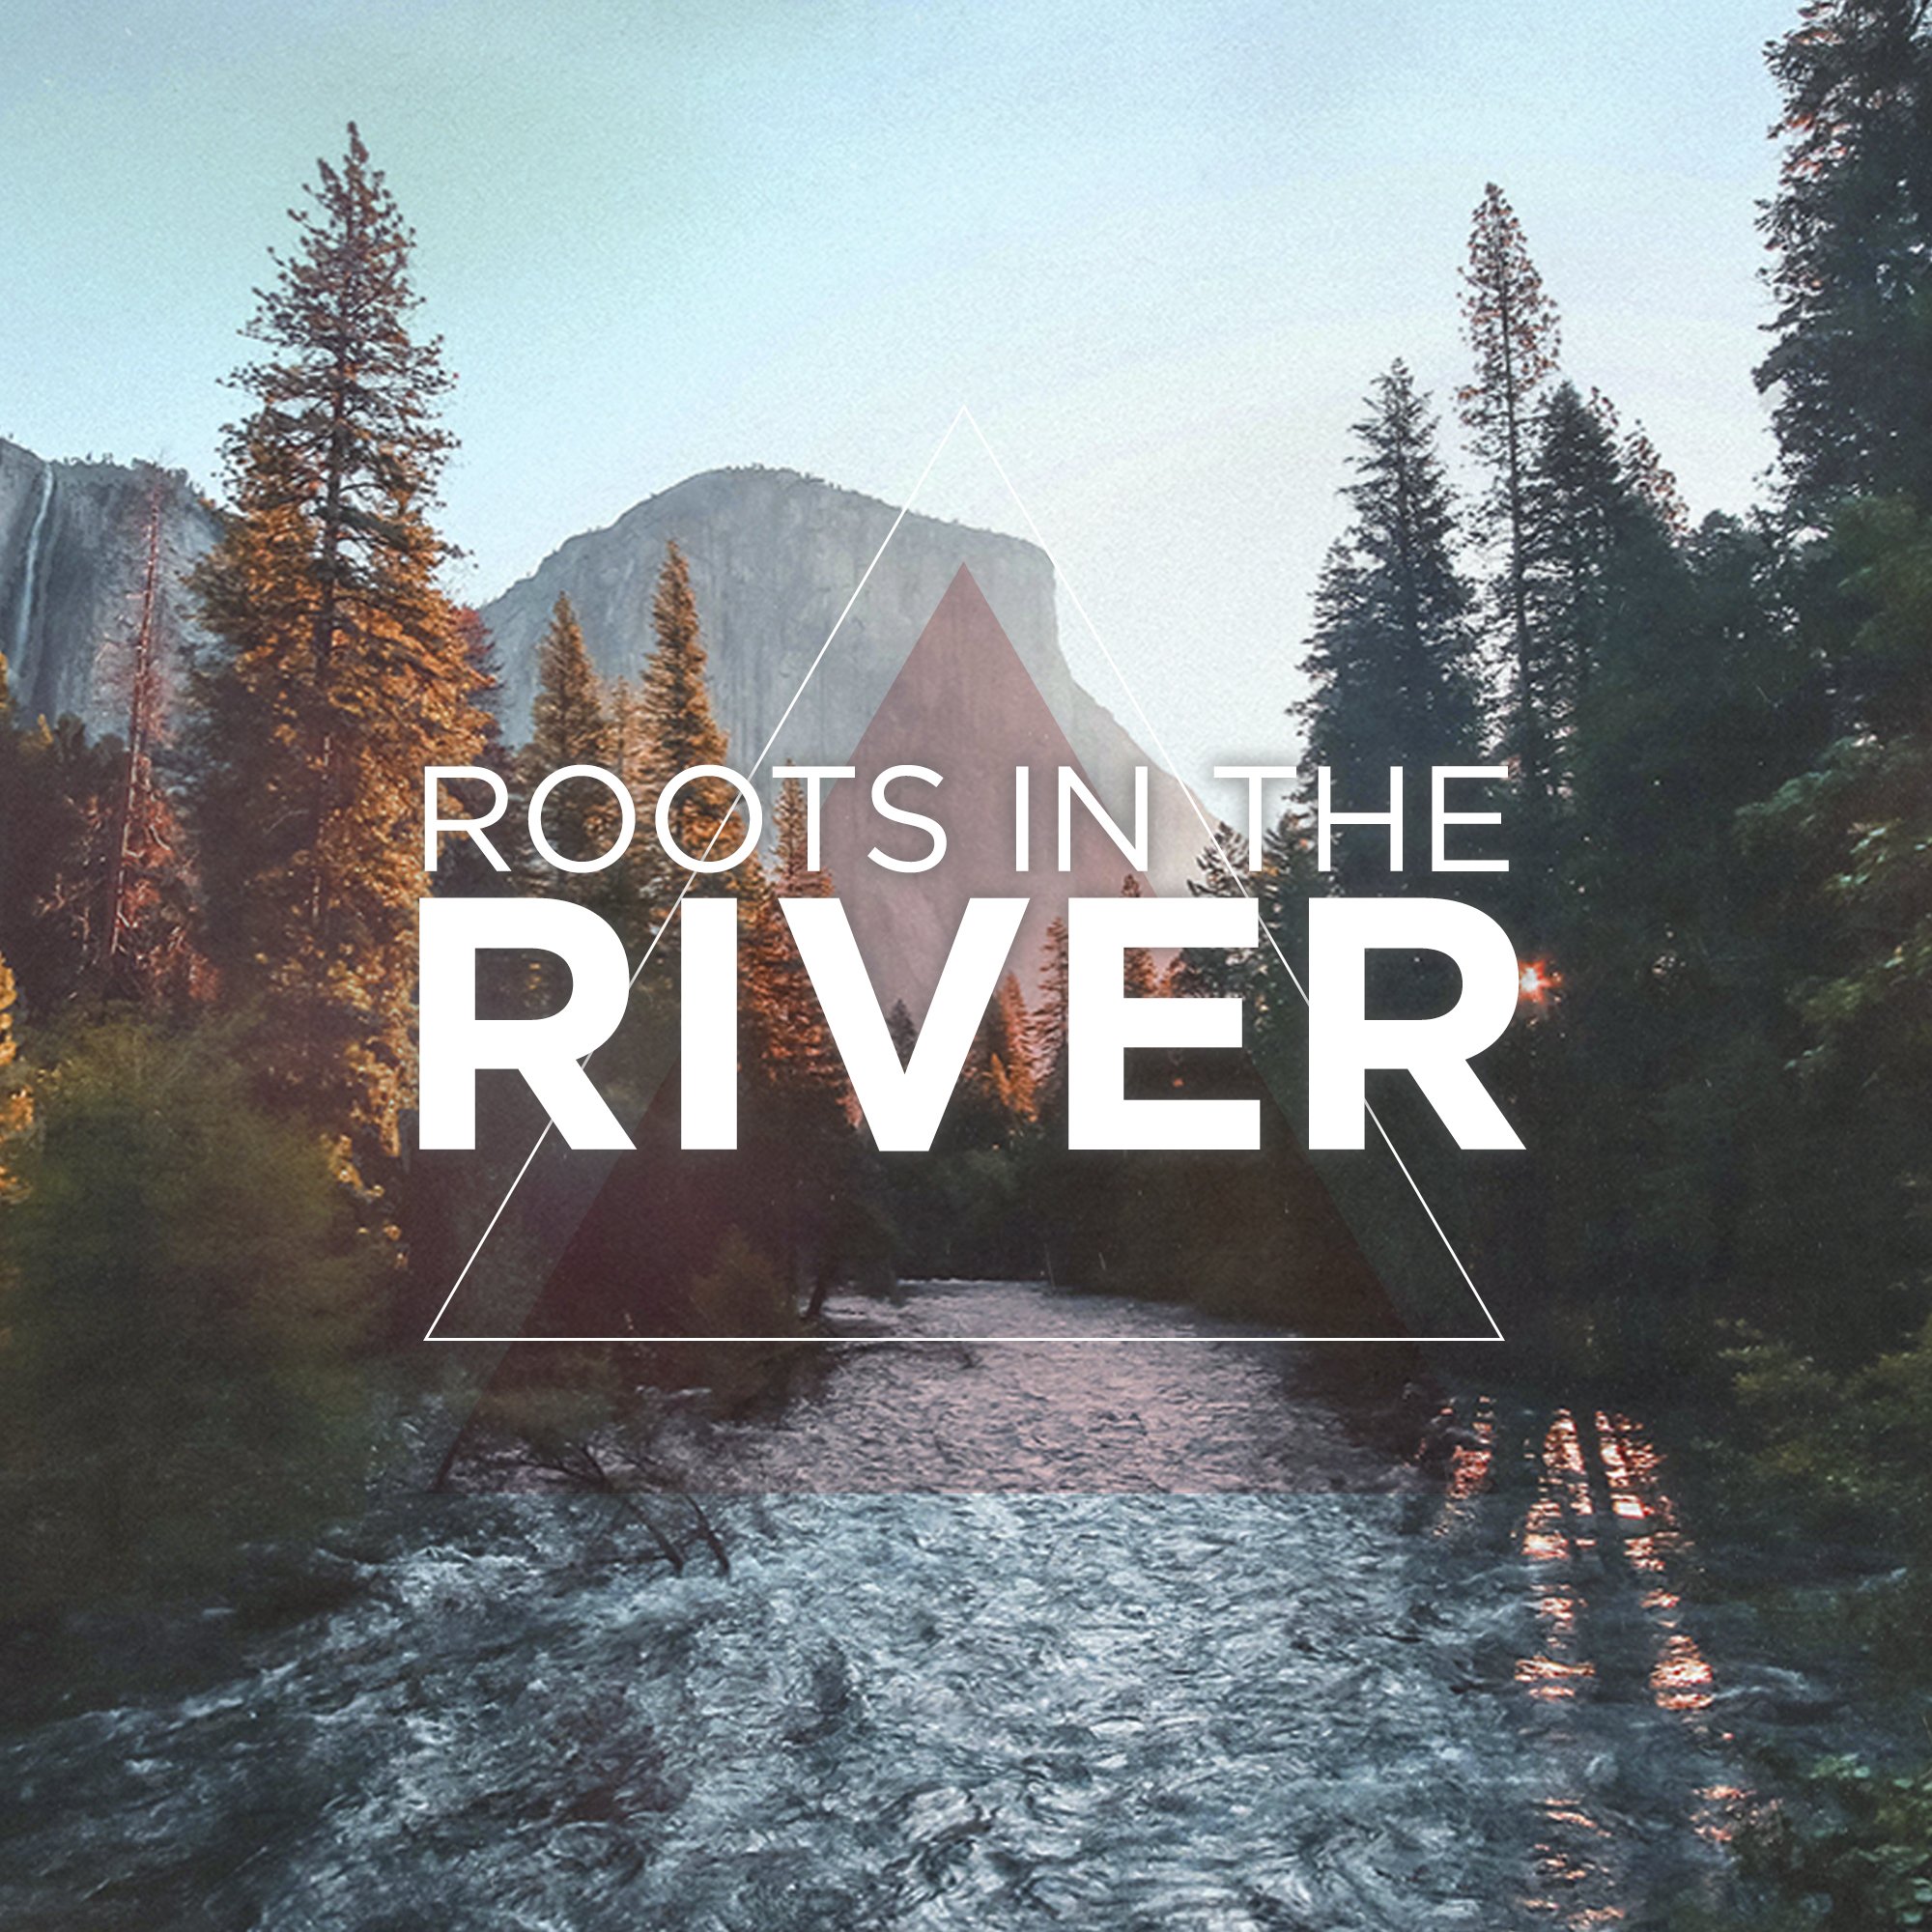 Roots River_Square.jpg